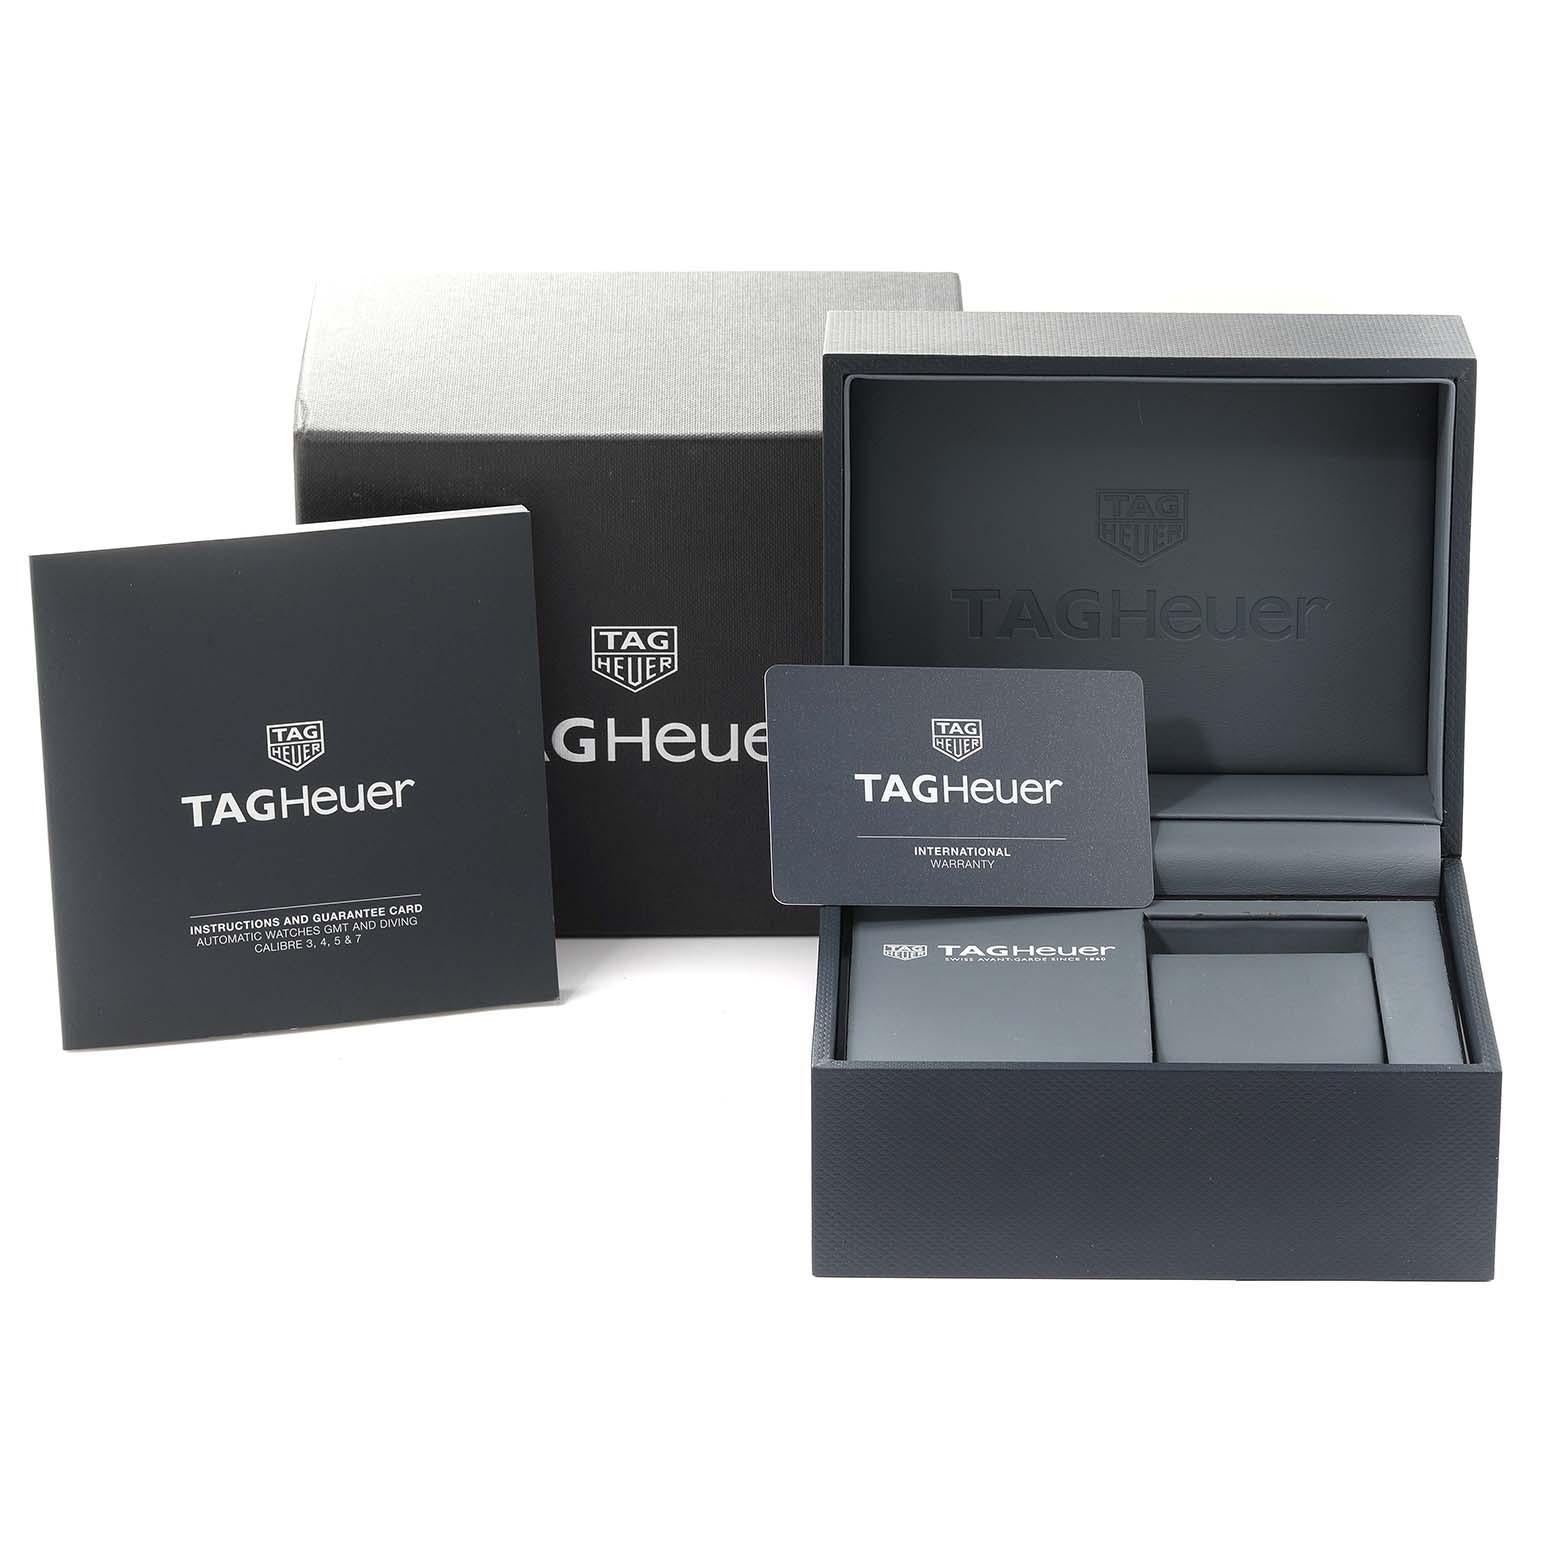 Tag Heuer Aquaracer Calibre 5 Black Dial Steel Mens Watch WAY201A Box Card. Automatic self-winding movement. Stainless steel case 43.0 mm in diameter. Black unidirectional rotating bezel. Scratch resistant sapphire crystal. Black dial with luminous